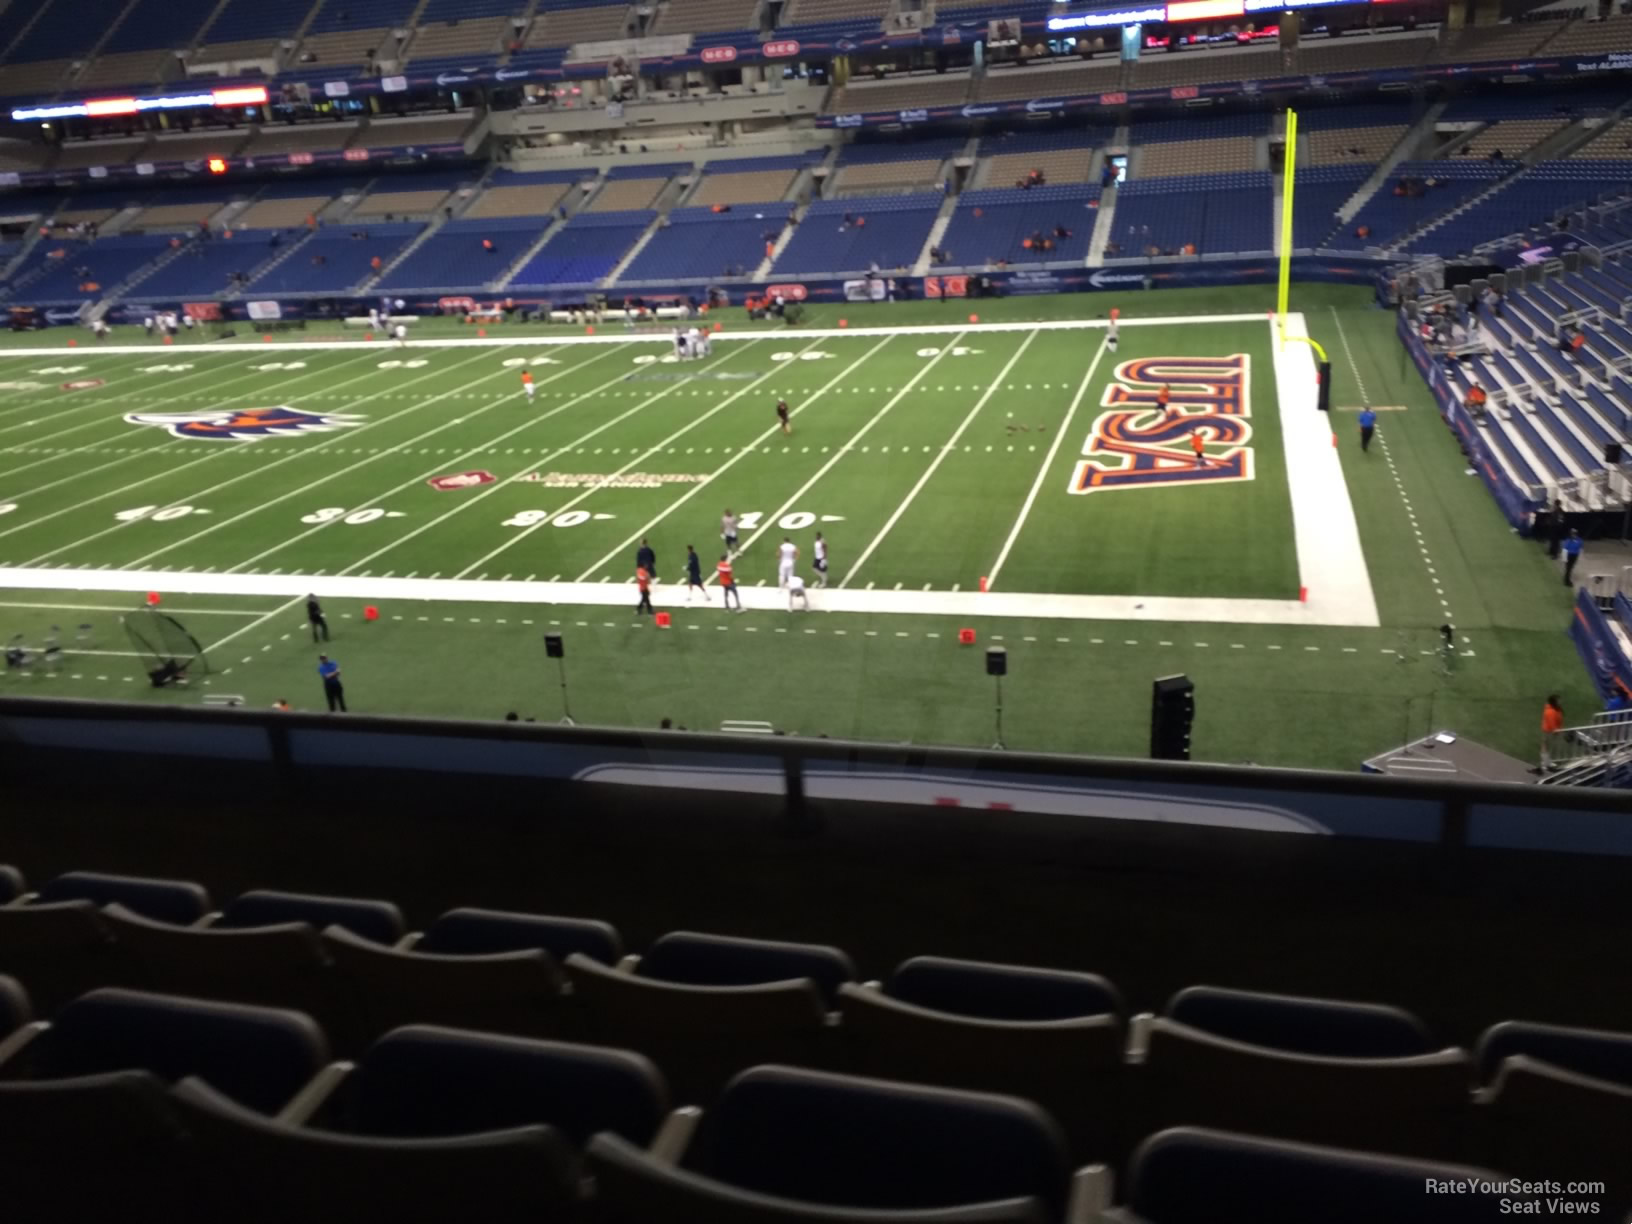 section 230, row 5 seat view  for football - alamodome